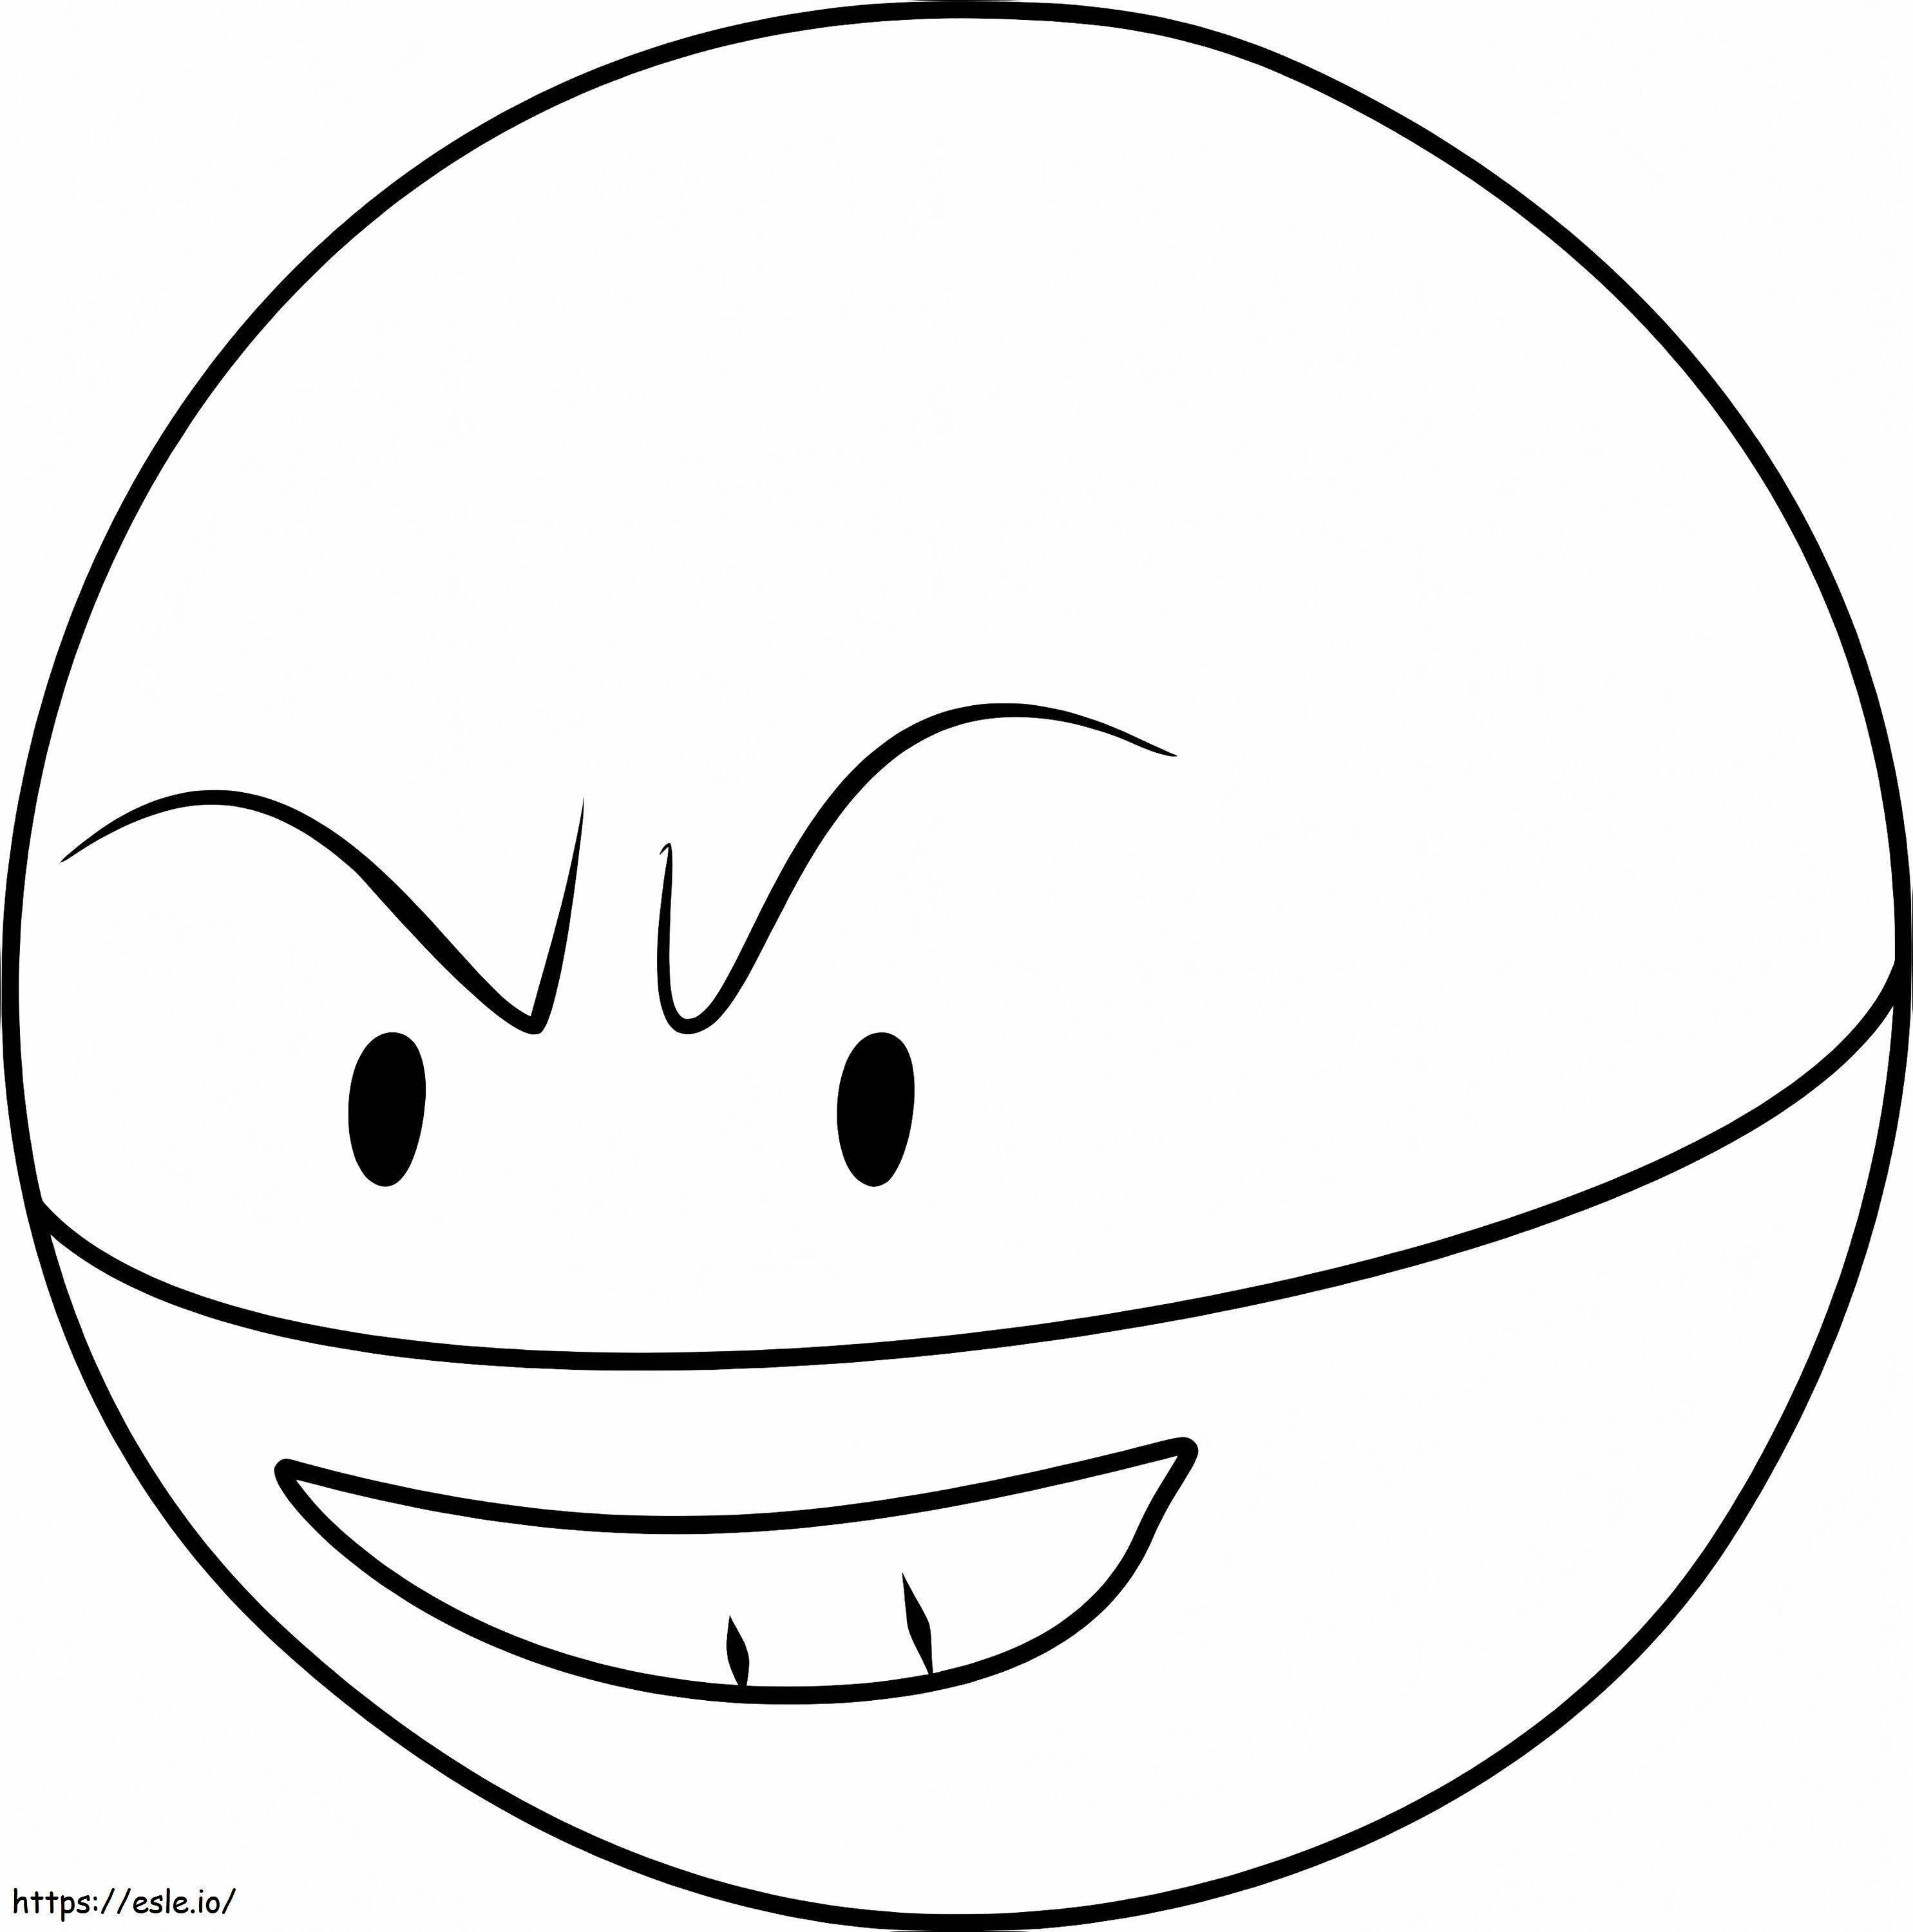 Electrode In Pokemon coloring page